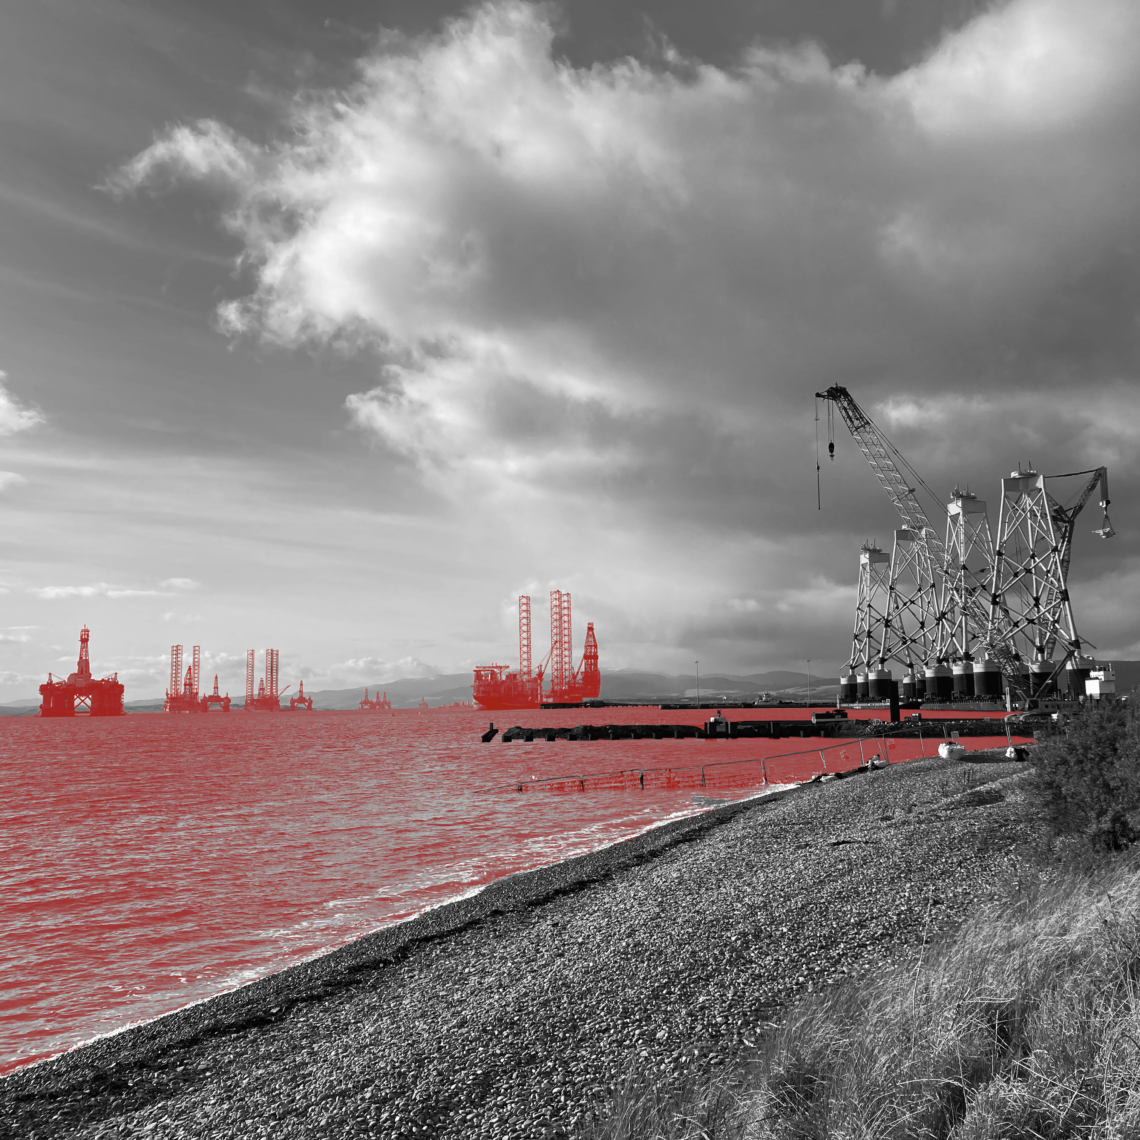 Episode image: In the Cromarty Firth at the edge of Nigg, Scotland, retired oil rigs, left, and, to the right, wind turbine supports, or “jackets,” waiting to be towed out to sea. Photo by Victoria MacArthur. Image editing by Mara Guevarra.